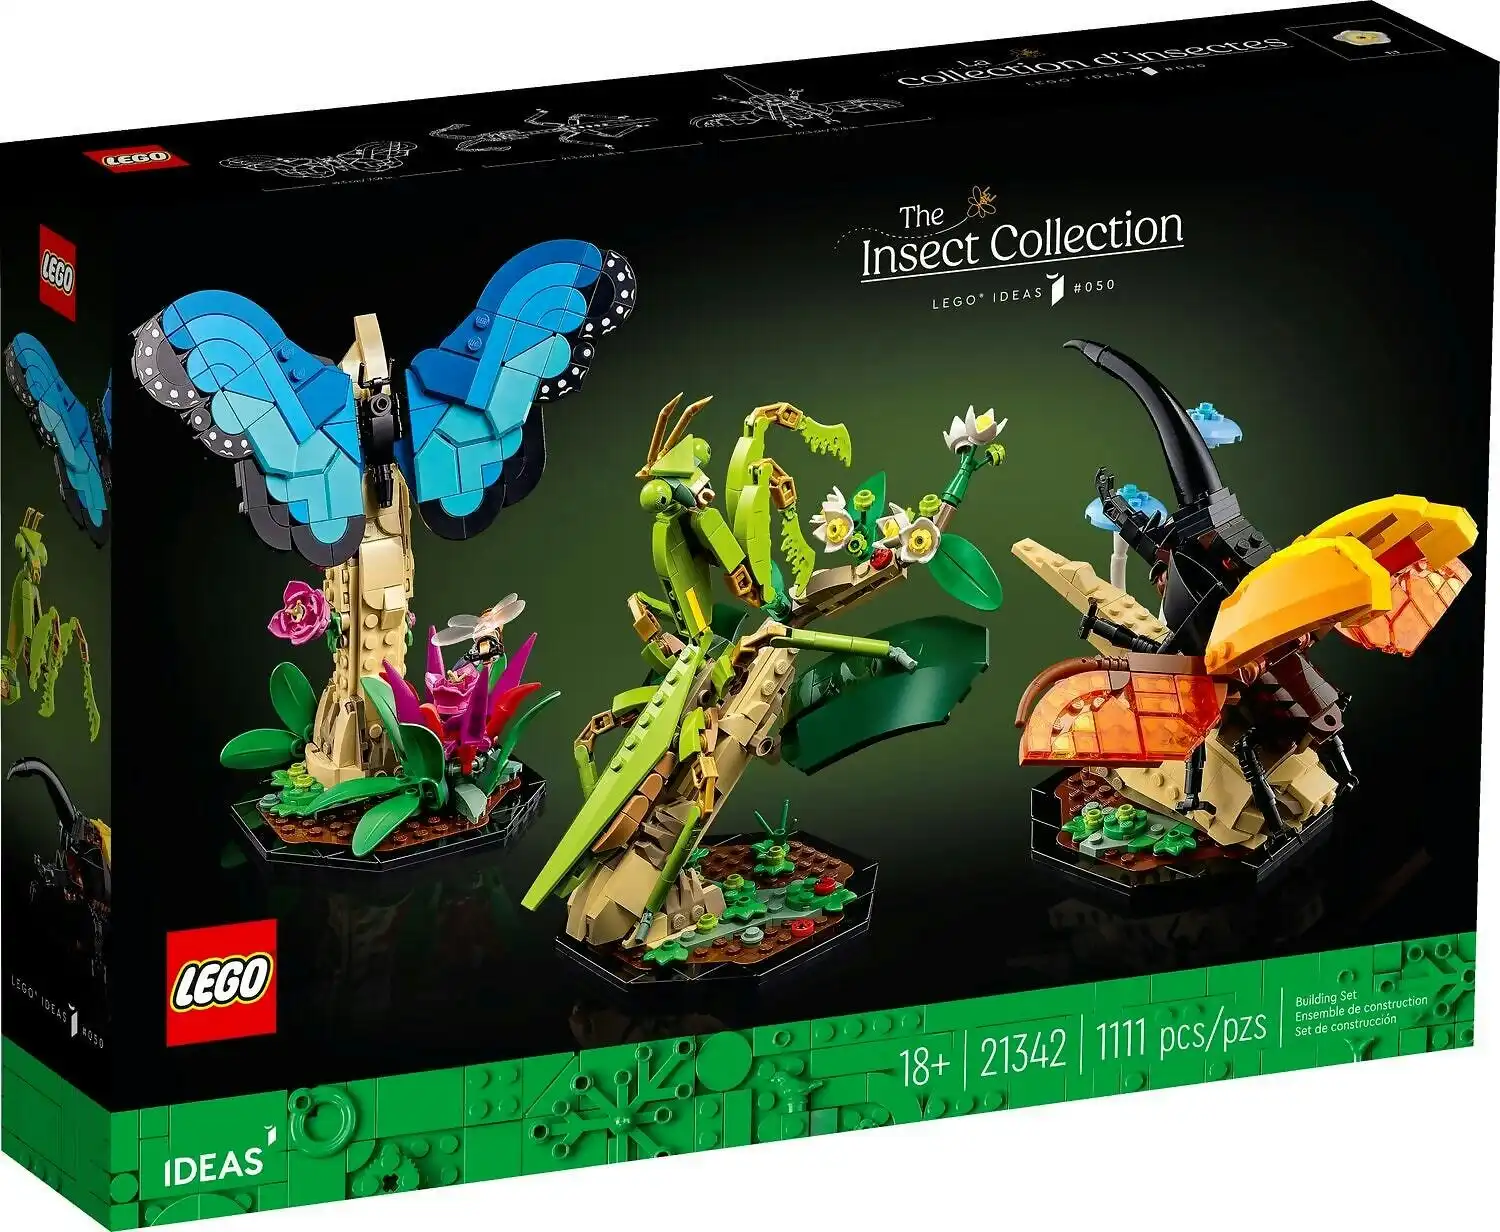 LEGO 21342 The Insect Collection - Ideas